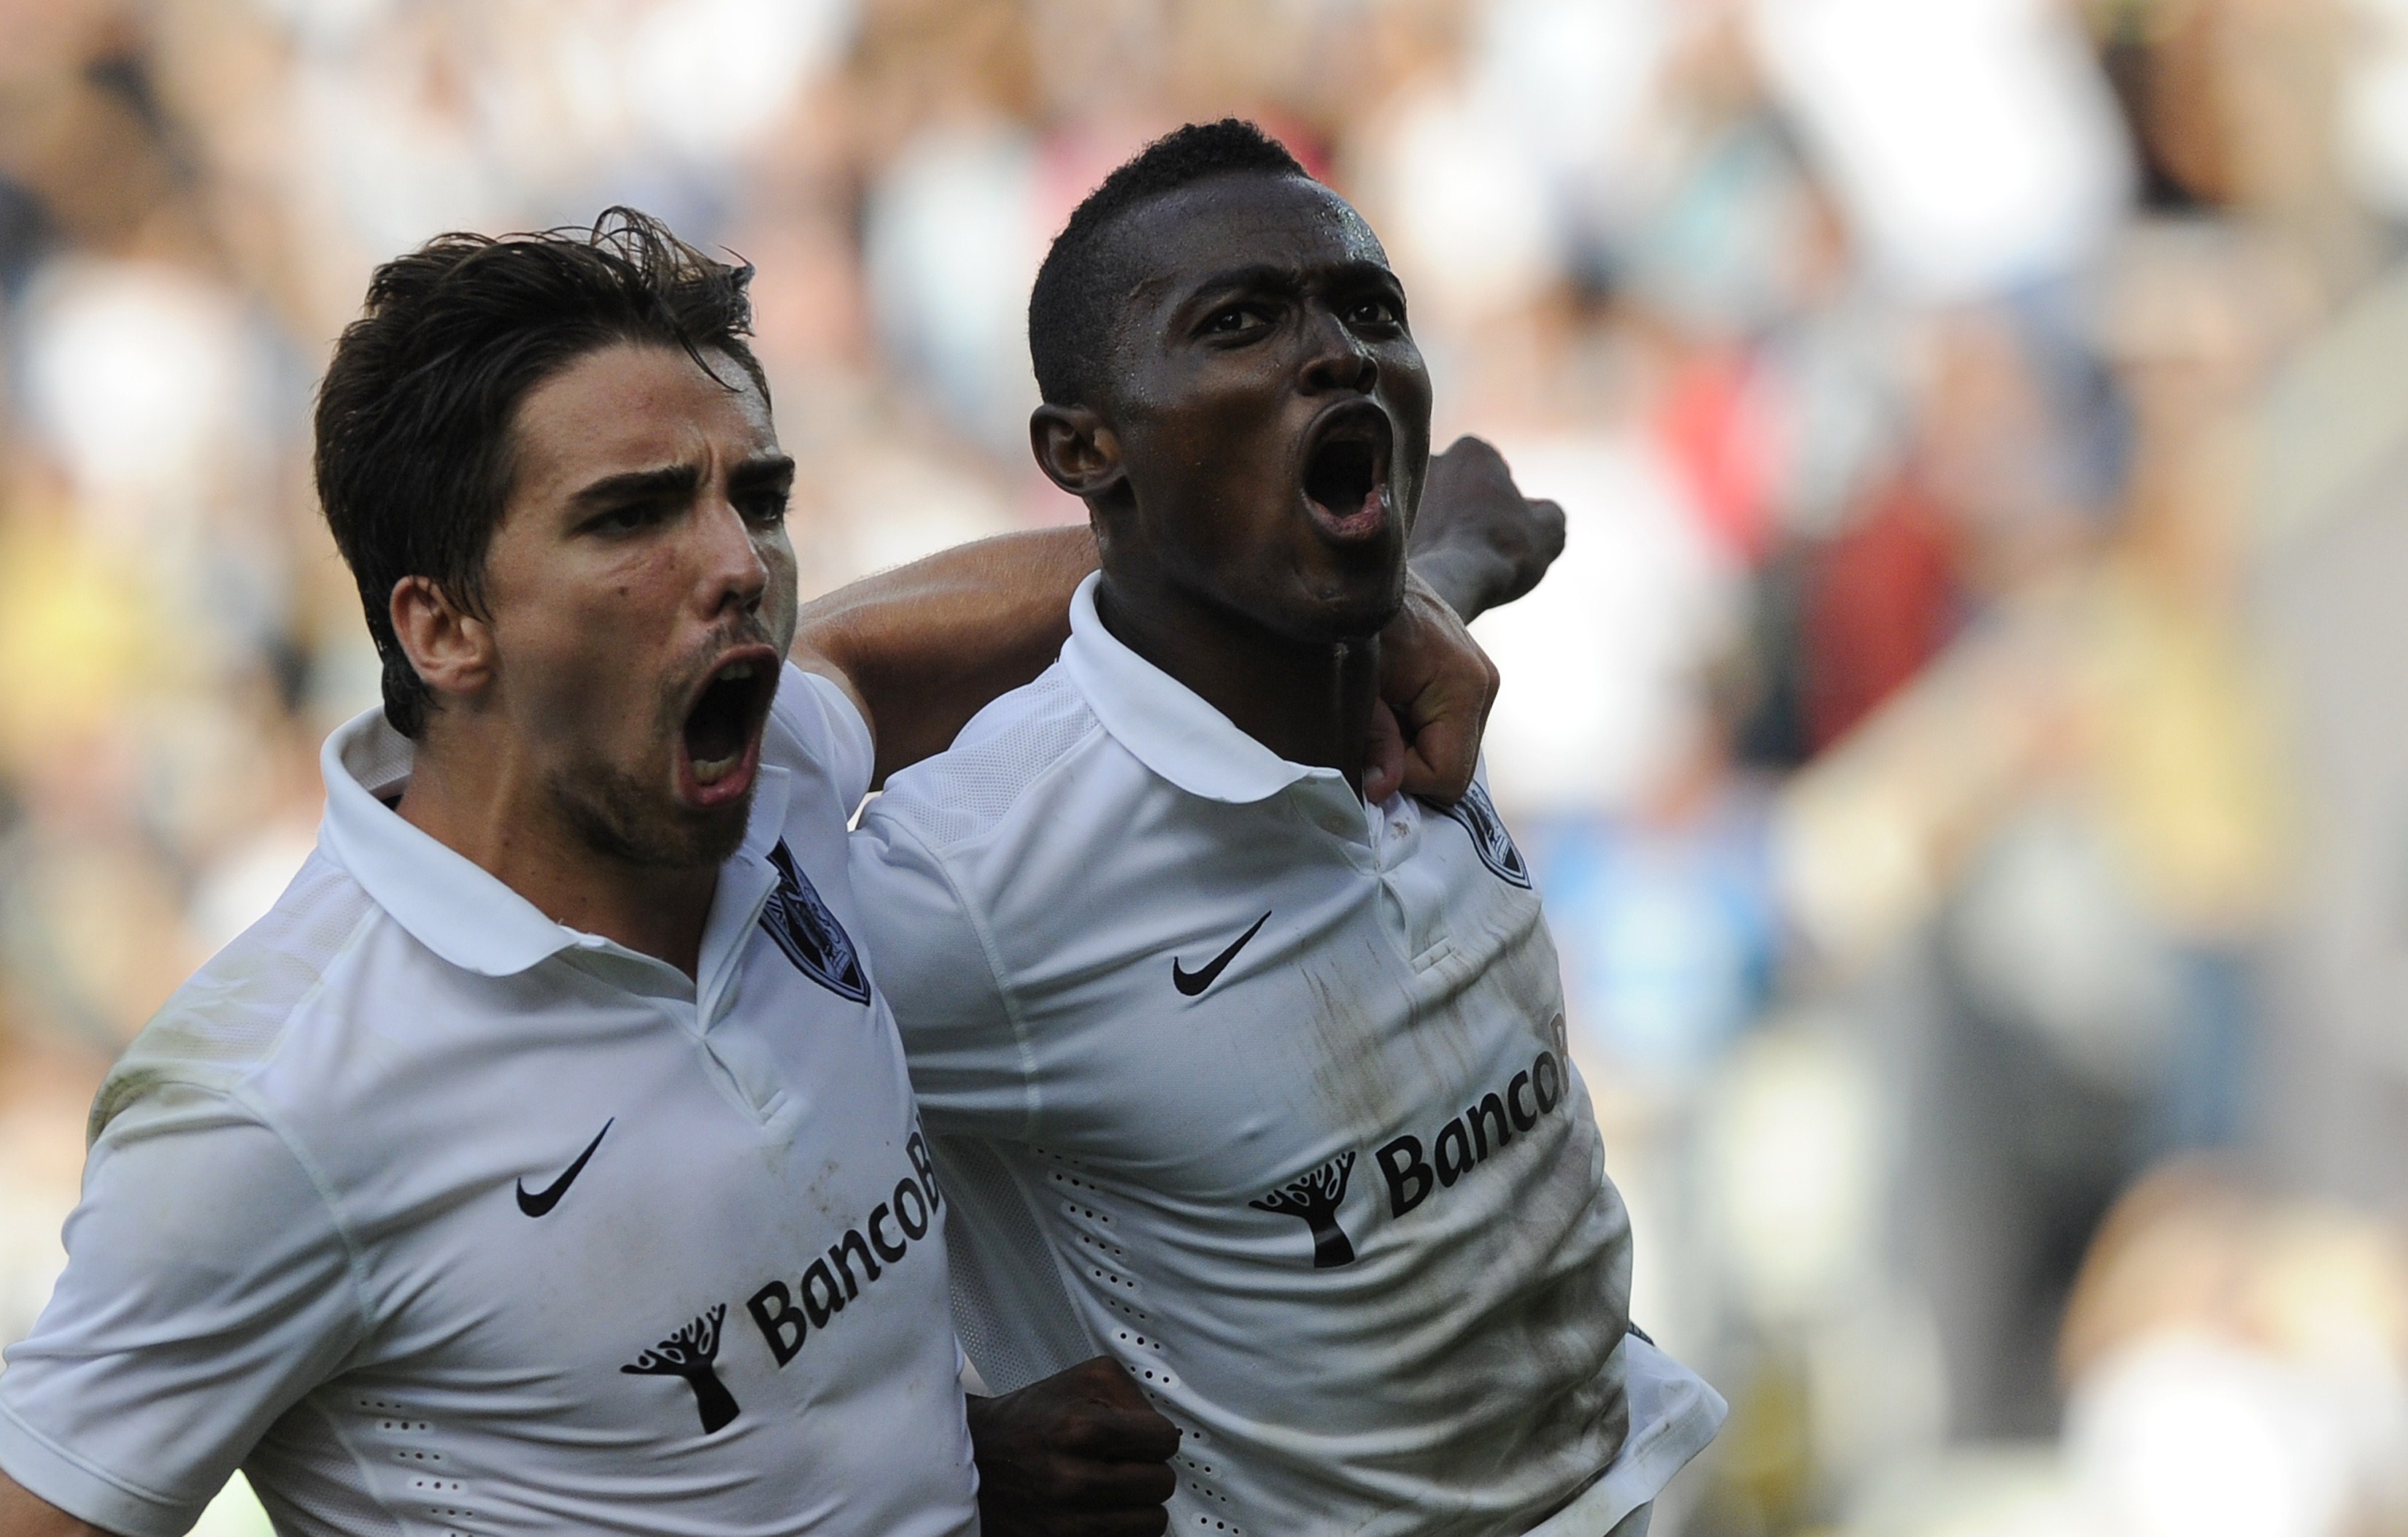 Vitoria SC's Ghanaian midfielder Bernard Mensah (R) celebrates with his teammate forward Tomane after scoring during the Portuguese league football match Vitoria SC vs FC Porto at the Afonso Henriques Stadium in Guimaraes on September 14, 2014.  AFP PHOTO/ MIGUEL RIOPA        (Photo credit should read MIGUEL RIOPA/AFP/Getty Images)